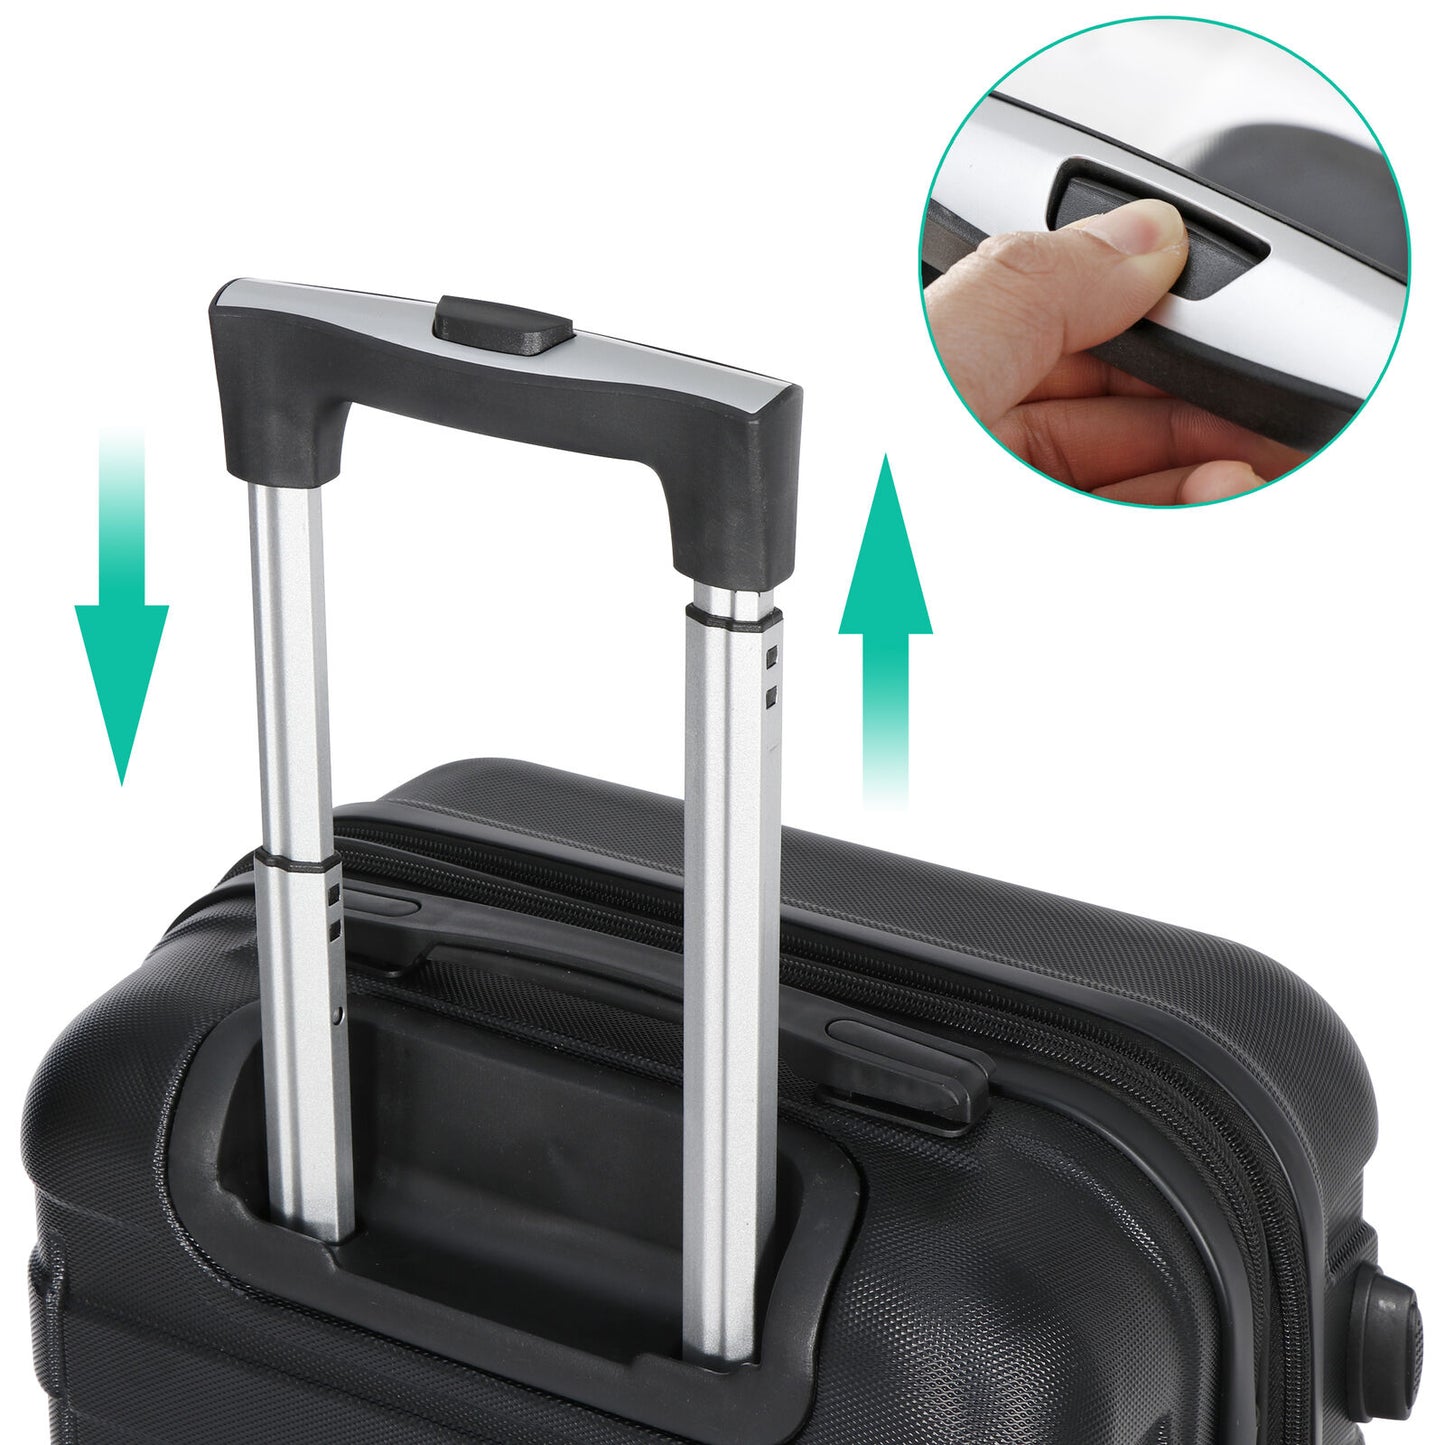 High Quality Carry-On Suitcase Luggage with Spinner Wheels 9.5''x14.5''x22.4"